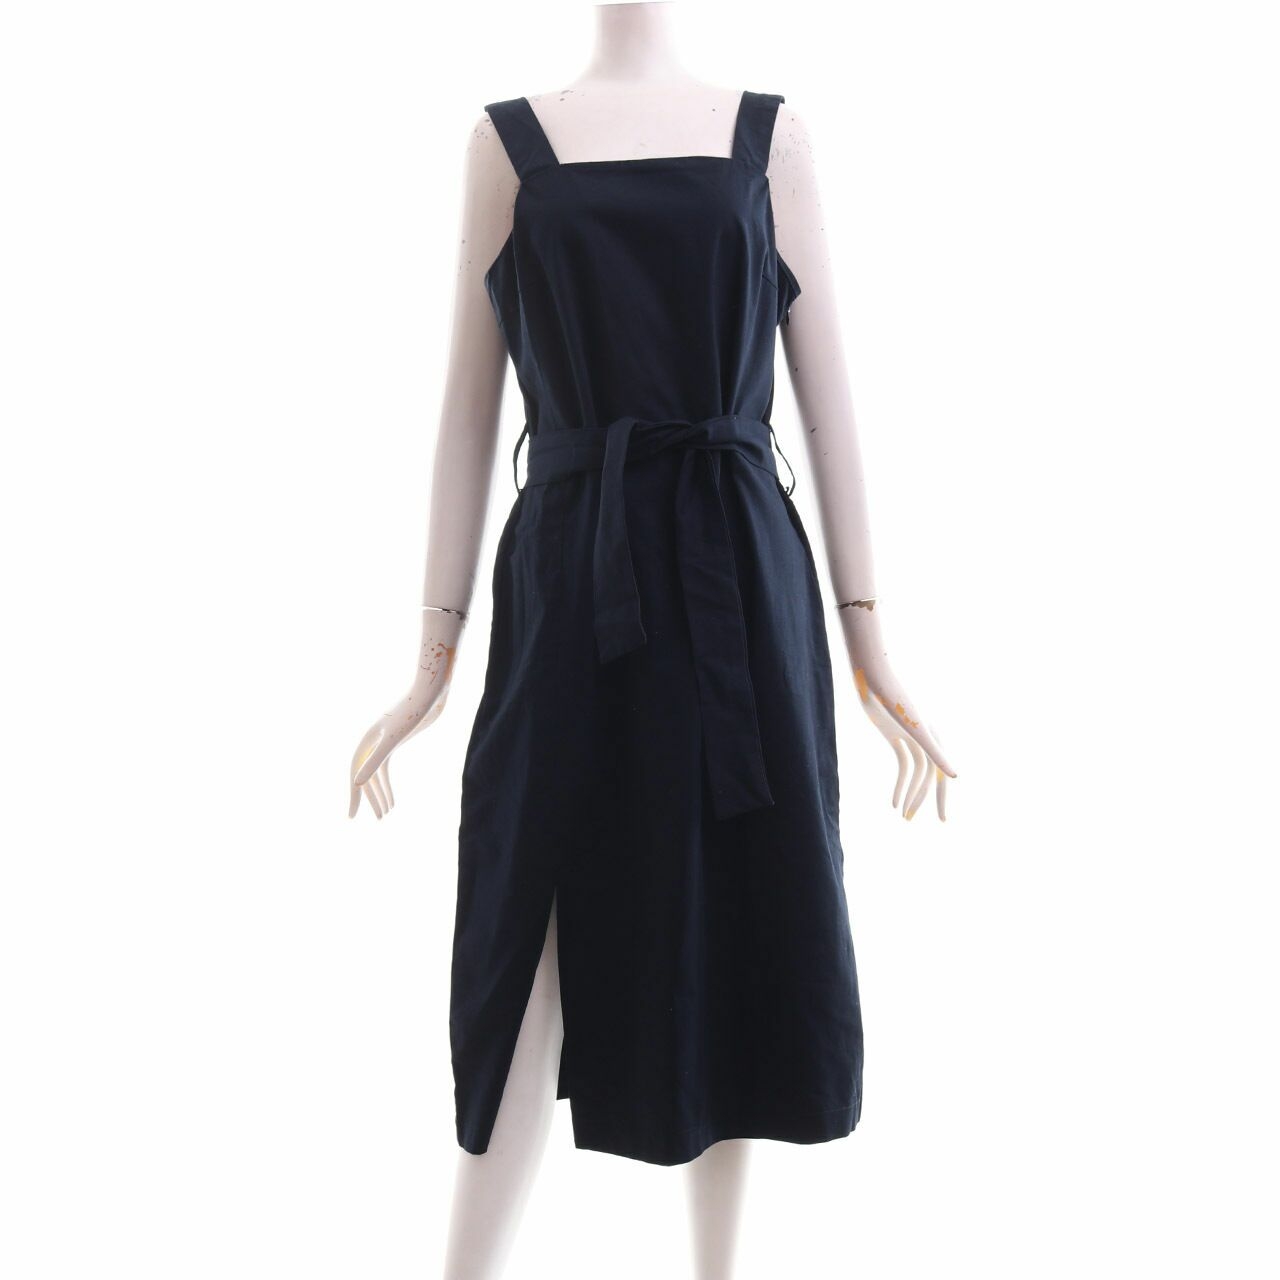 Schoncouture Navy With Slit Mini Dress